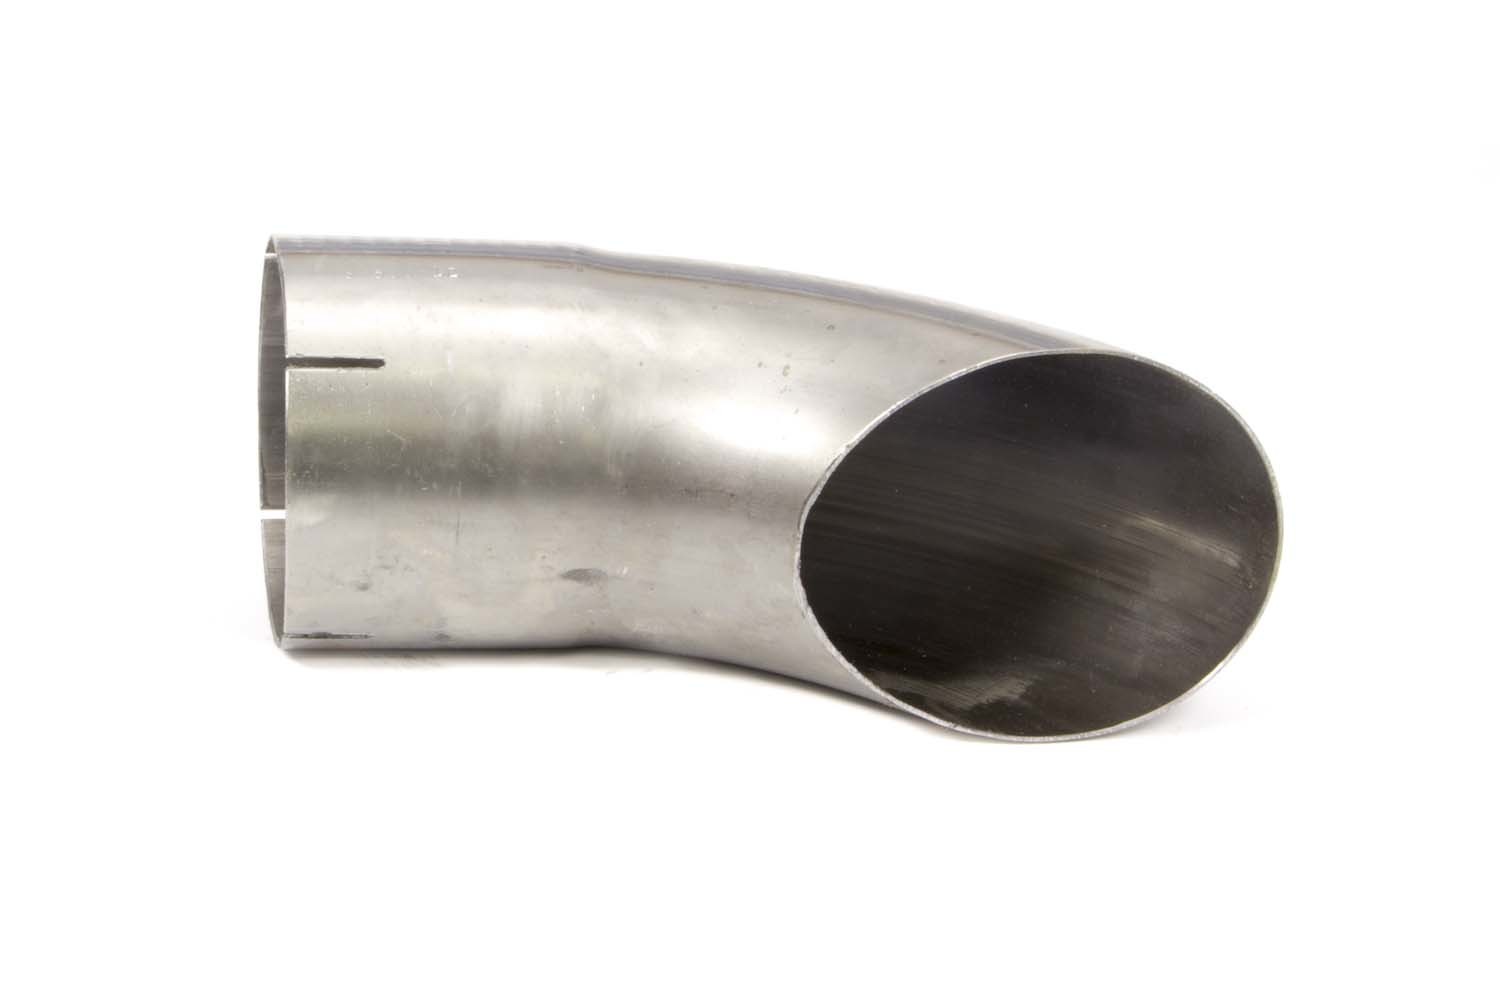 Schoenfeld Headers 5025 - Exhaust Tip, Clamp-On, 5 in Inlet, 5 in Round Outlet, 12 in Long, Single Wall, Cut Edge, Angled Cut, Turnout Style, Steel, Natural, Each